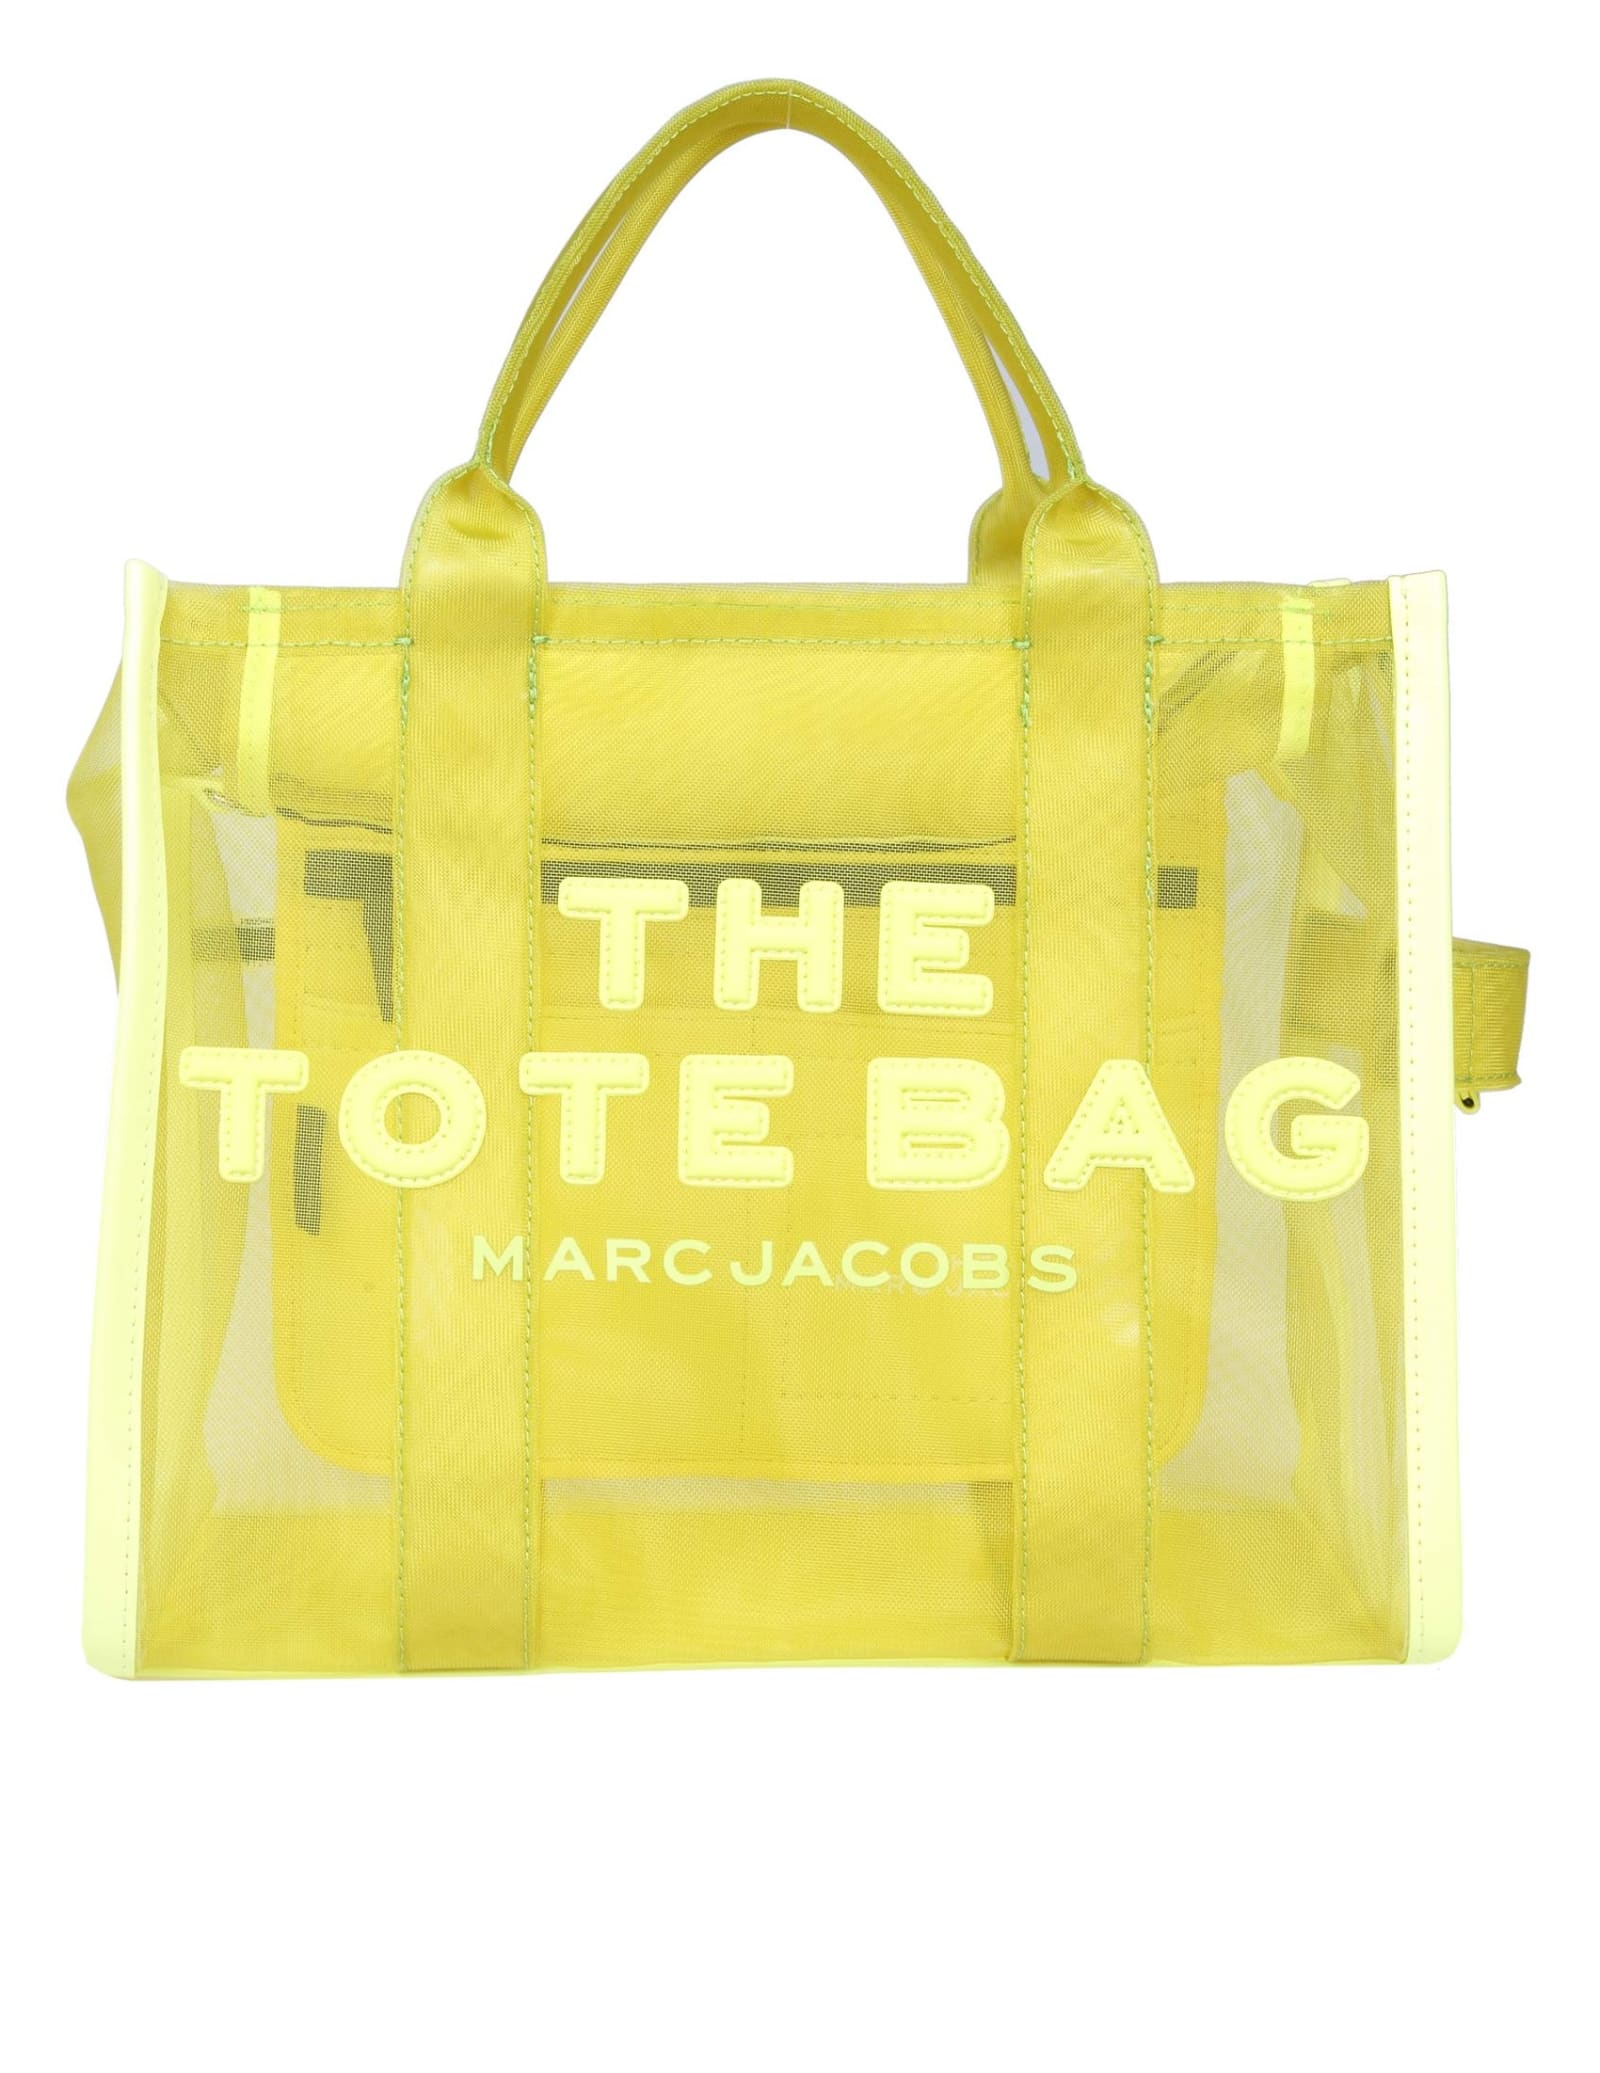 MARC JACOBS THE MESH SMALL TOTE BAG